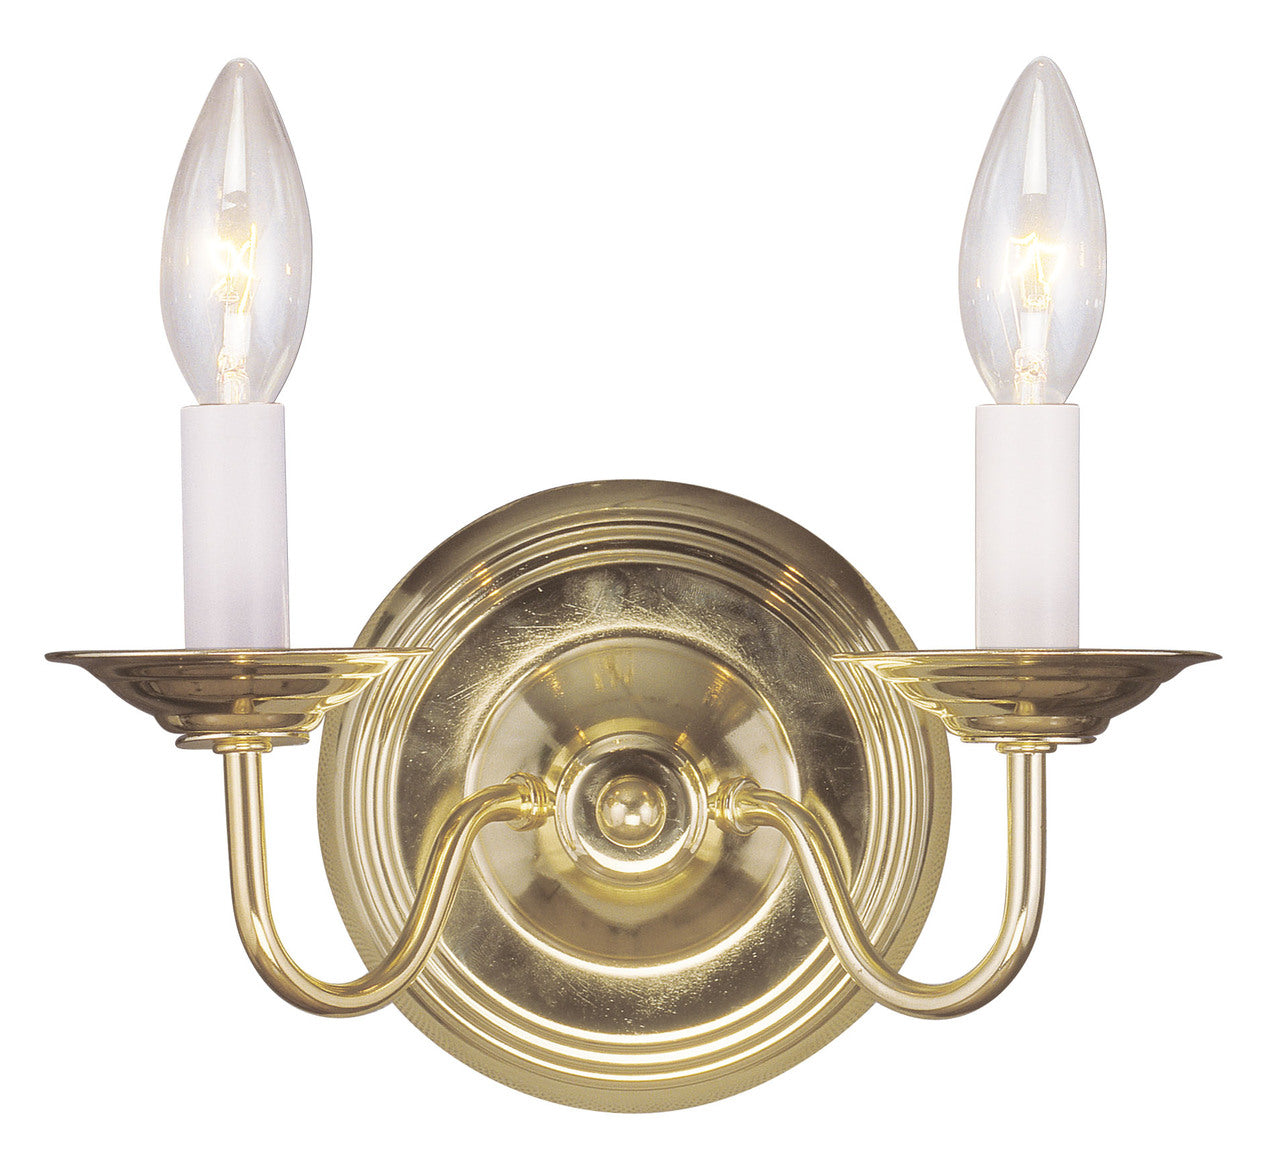 LIVEX Lighting 5018-02 Williamsburgh Wall Sconce in Polished Brass (2 Light)